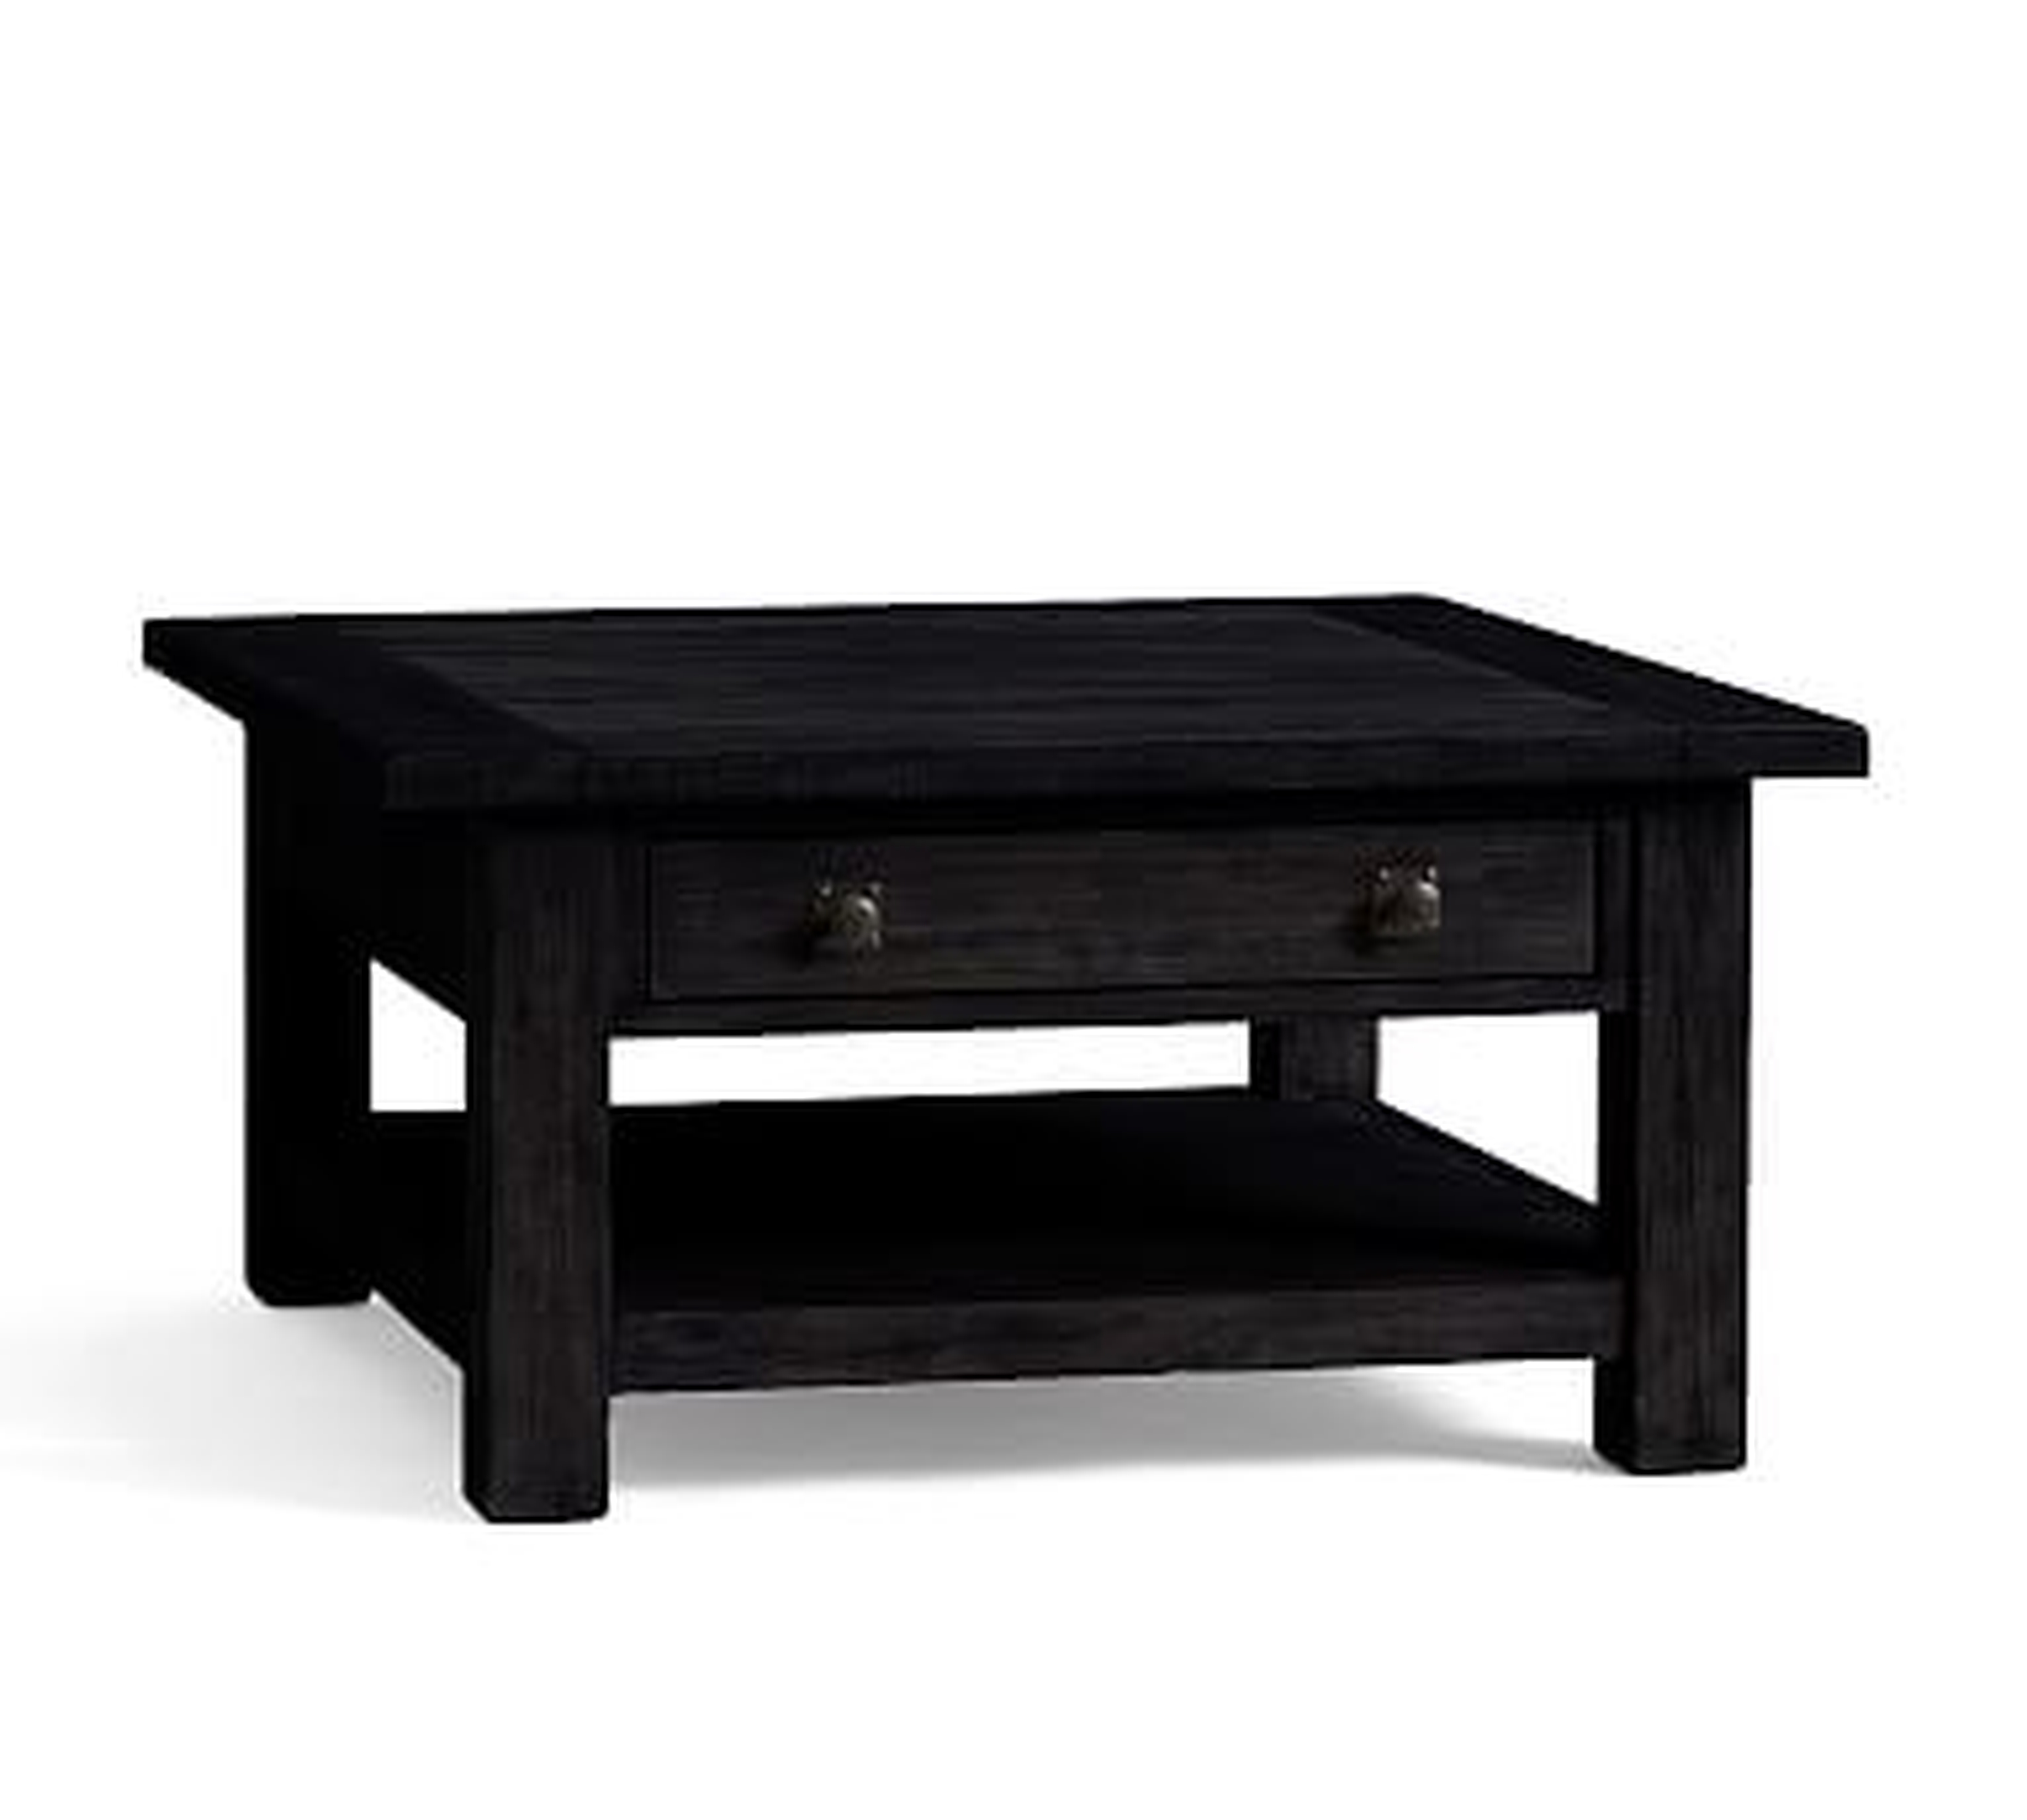 Benchwright Square Wood Coffee Table with Drawer, Blackened Oak, 36"L - Pottery Barn